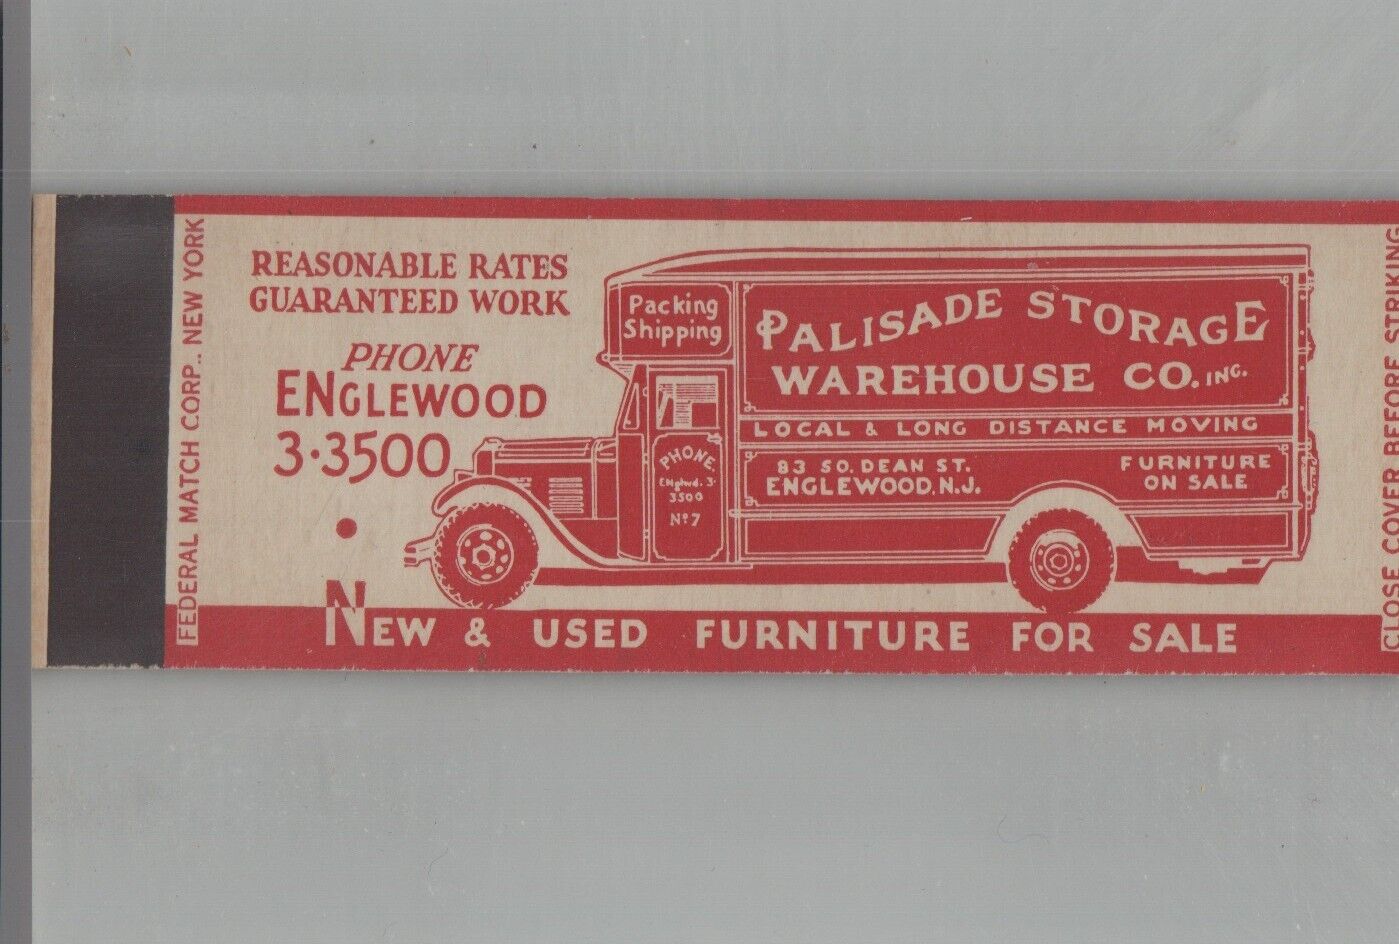 Matchbook Cover Palisade Storage Warehouse Co. Englewood, NJ Federal Tall Sample